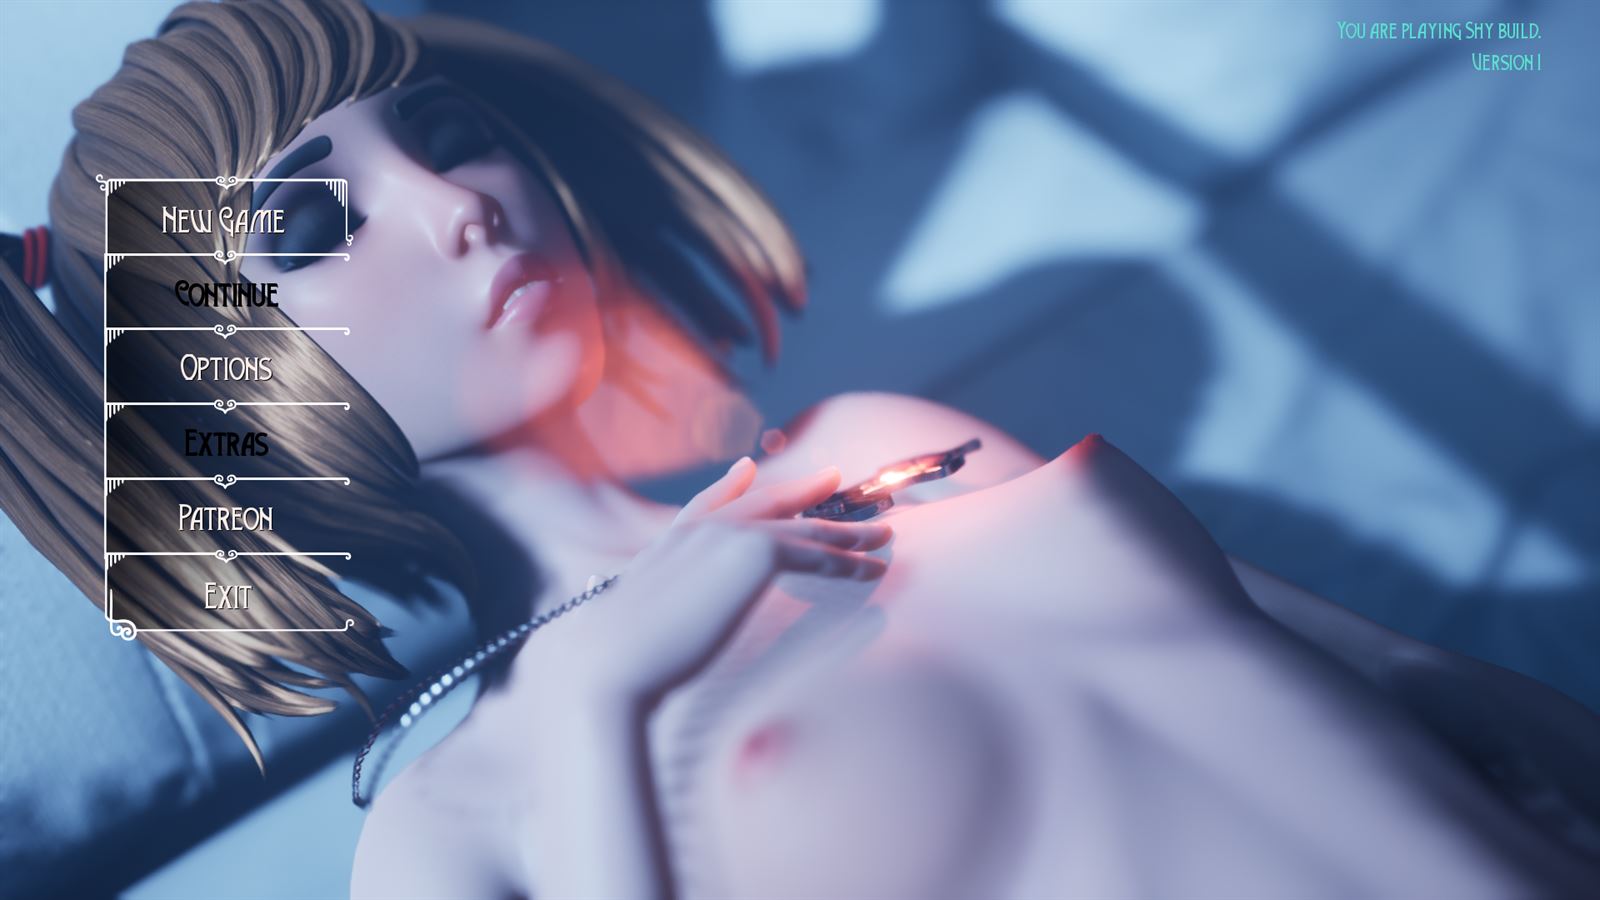 Unreal Engine] My Lust Wish - v0.8.8 10$ by SRT 18+ Adult xxx Porn Game  Download